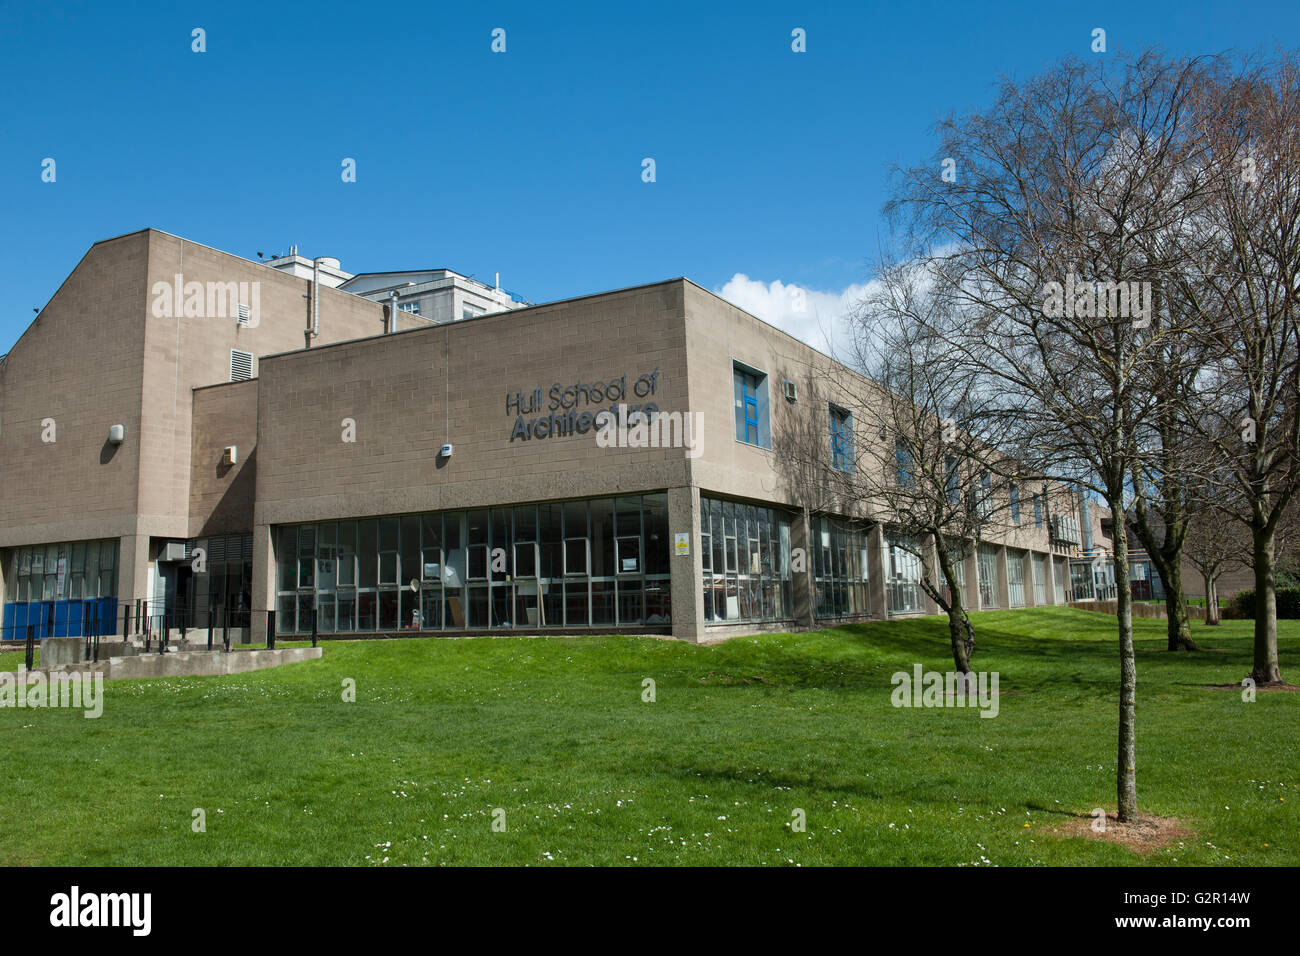 Hull School of Art and Design, Hull, East Yorkshire, England, UK. Stock Photo